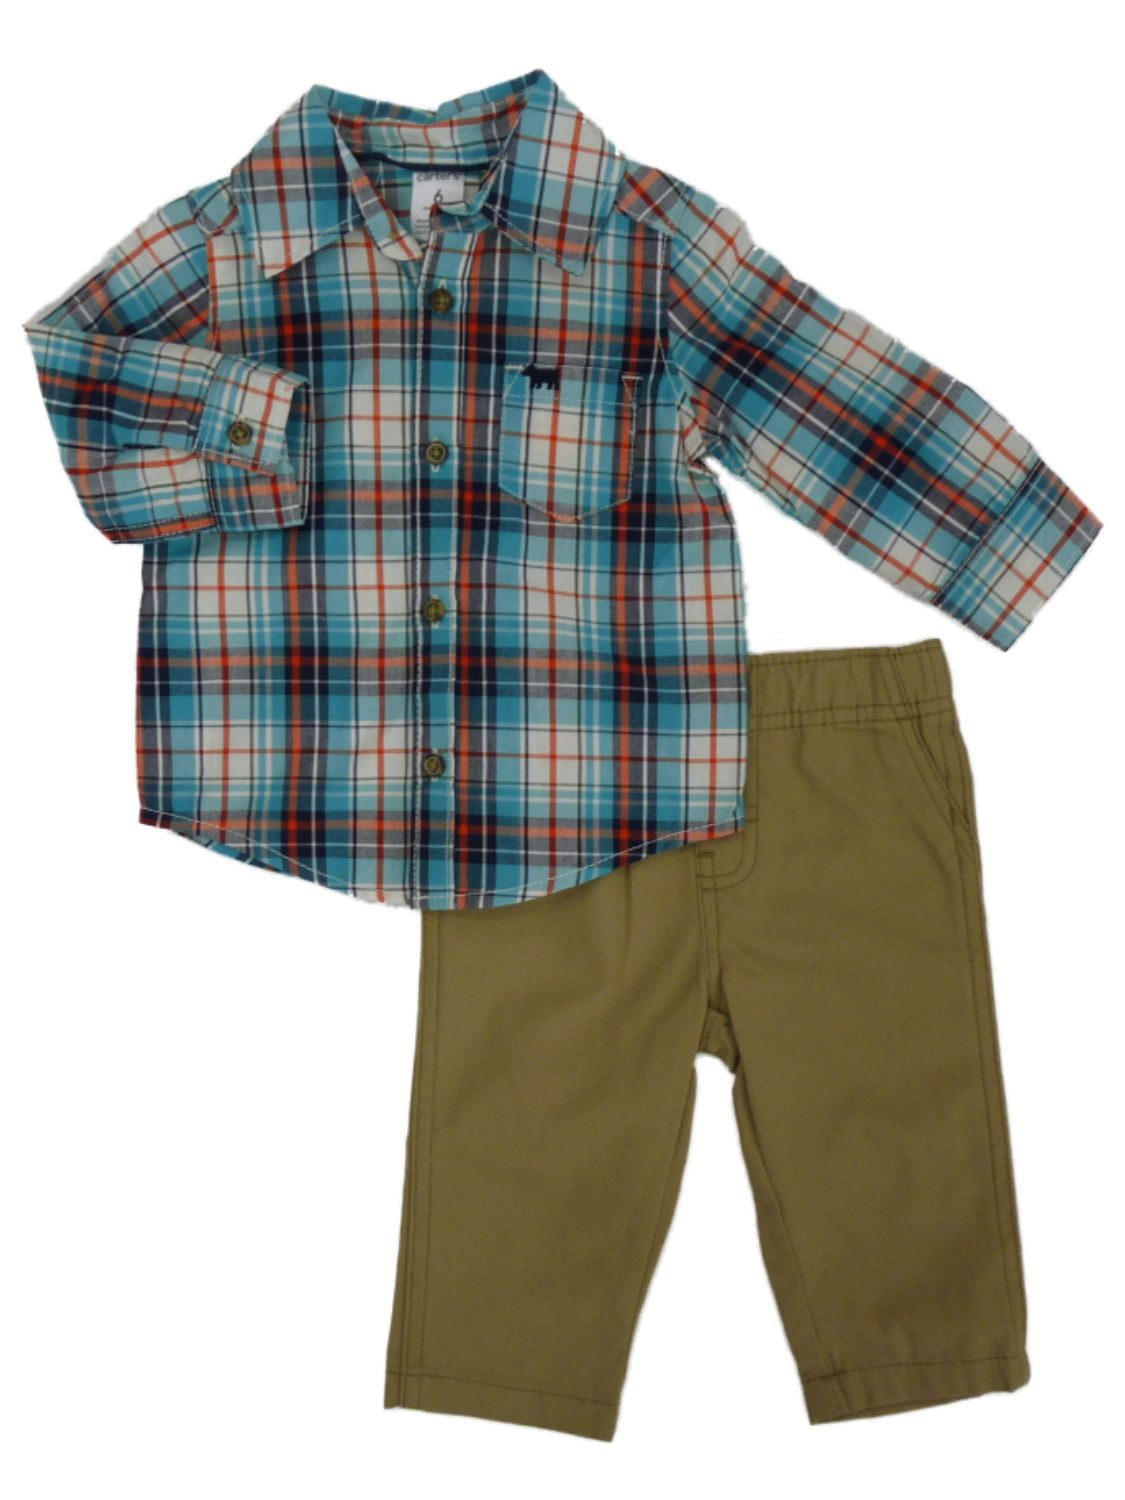 Details about   Carters Baby Boys 2 Piece Set S/S Plaid Shirt Shorts Navy Blue Size 18M NWT # 